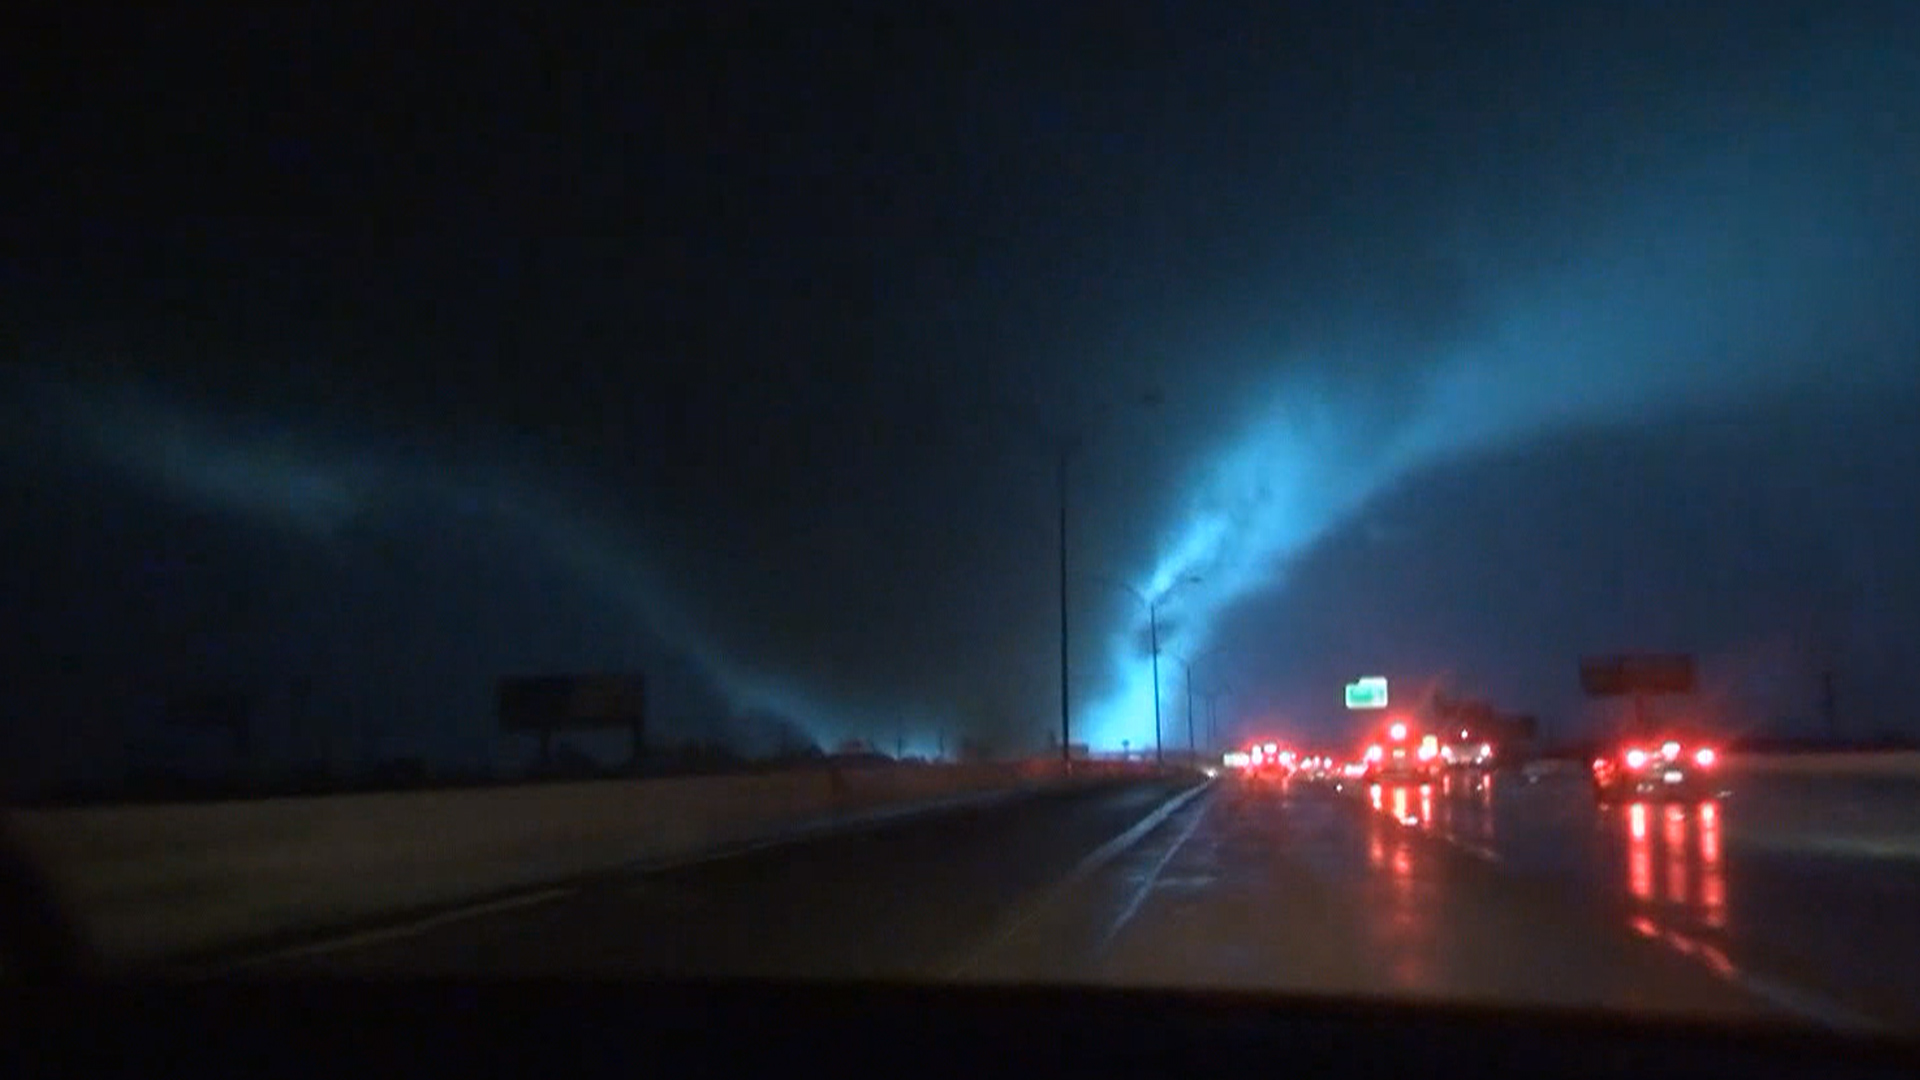 At least 8 dead as severe weather, tornadoes hit Dallas area - TODAY.com